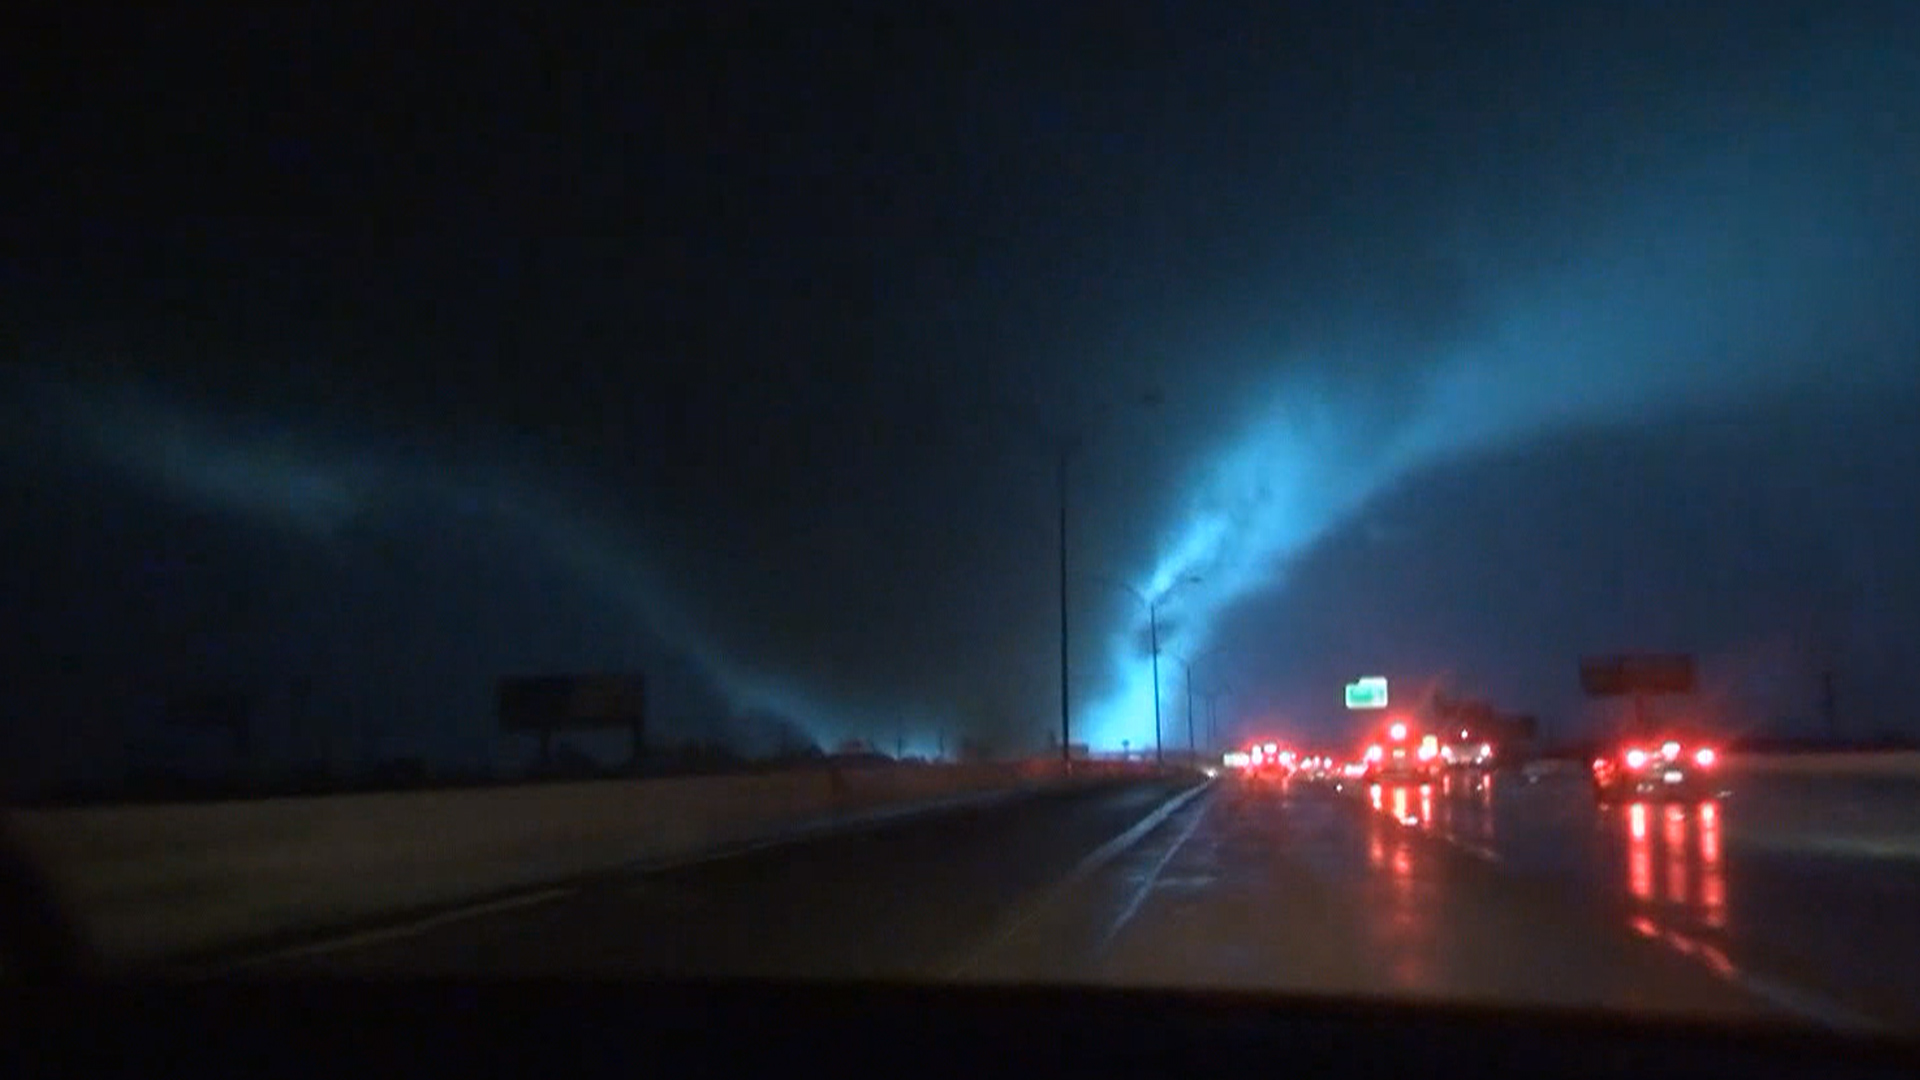 At least 8 dead as severe weather, tornadoes hit Dallas area - TODAY.com